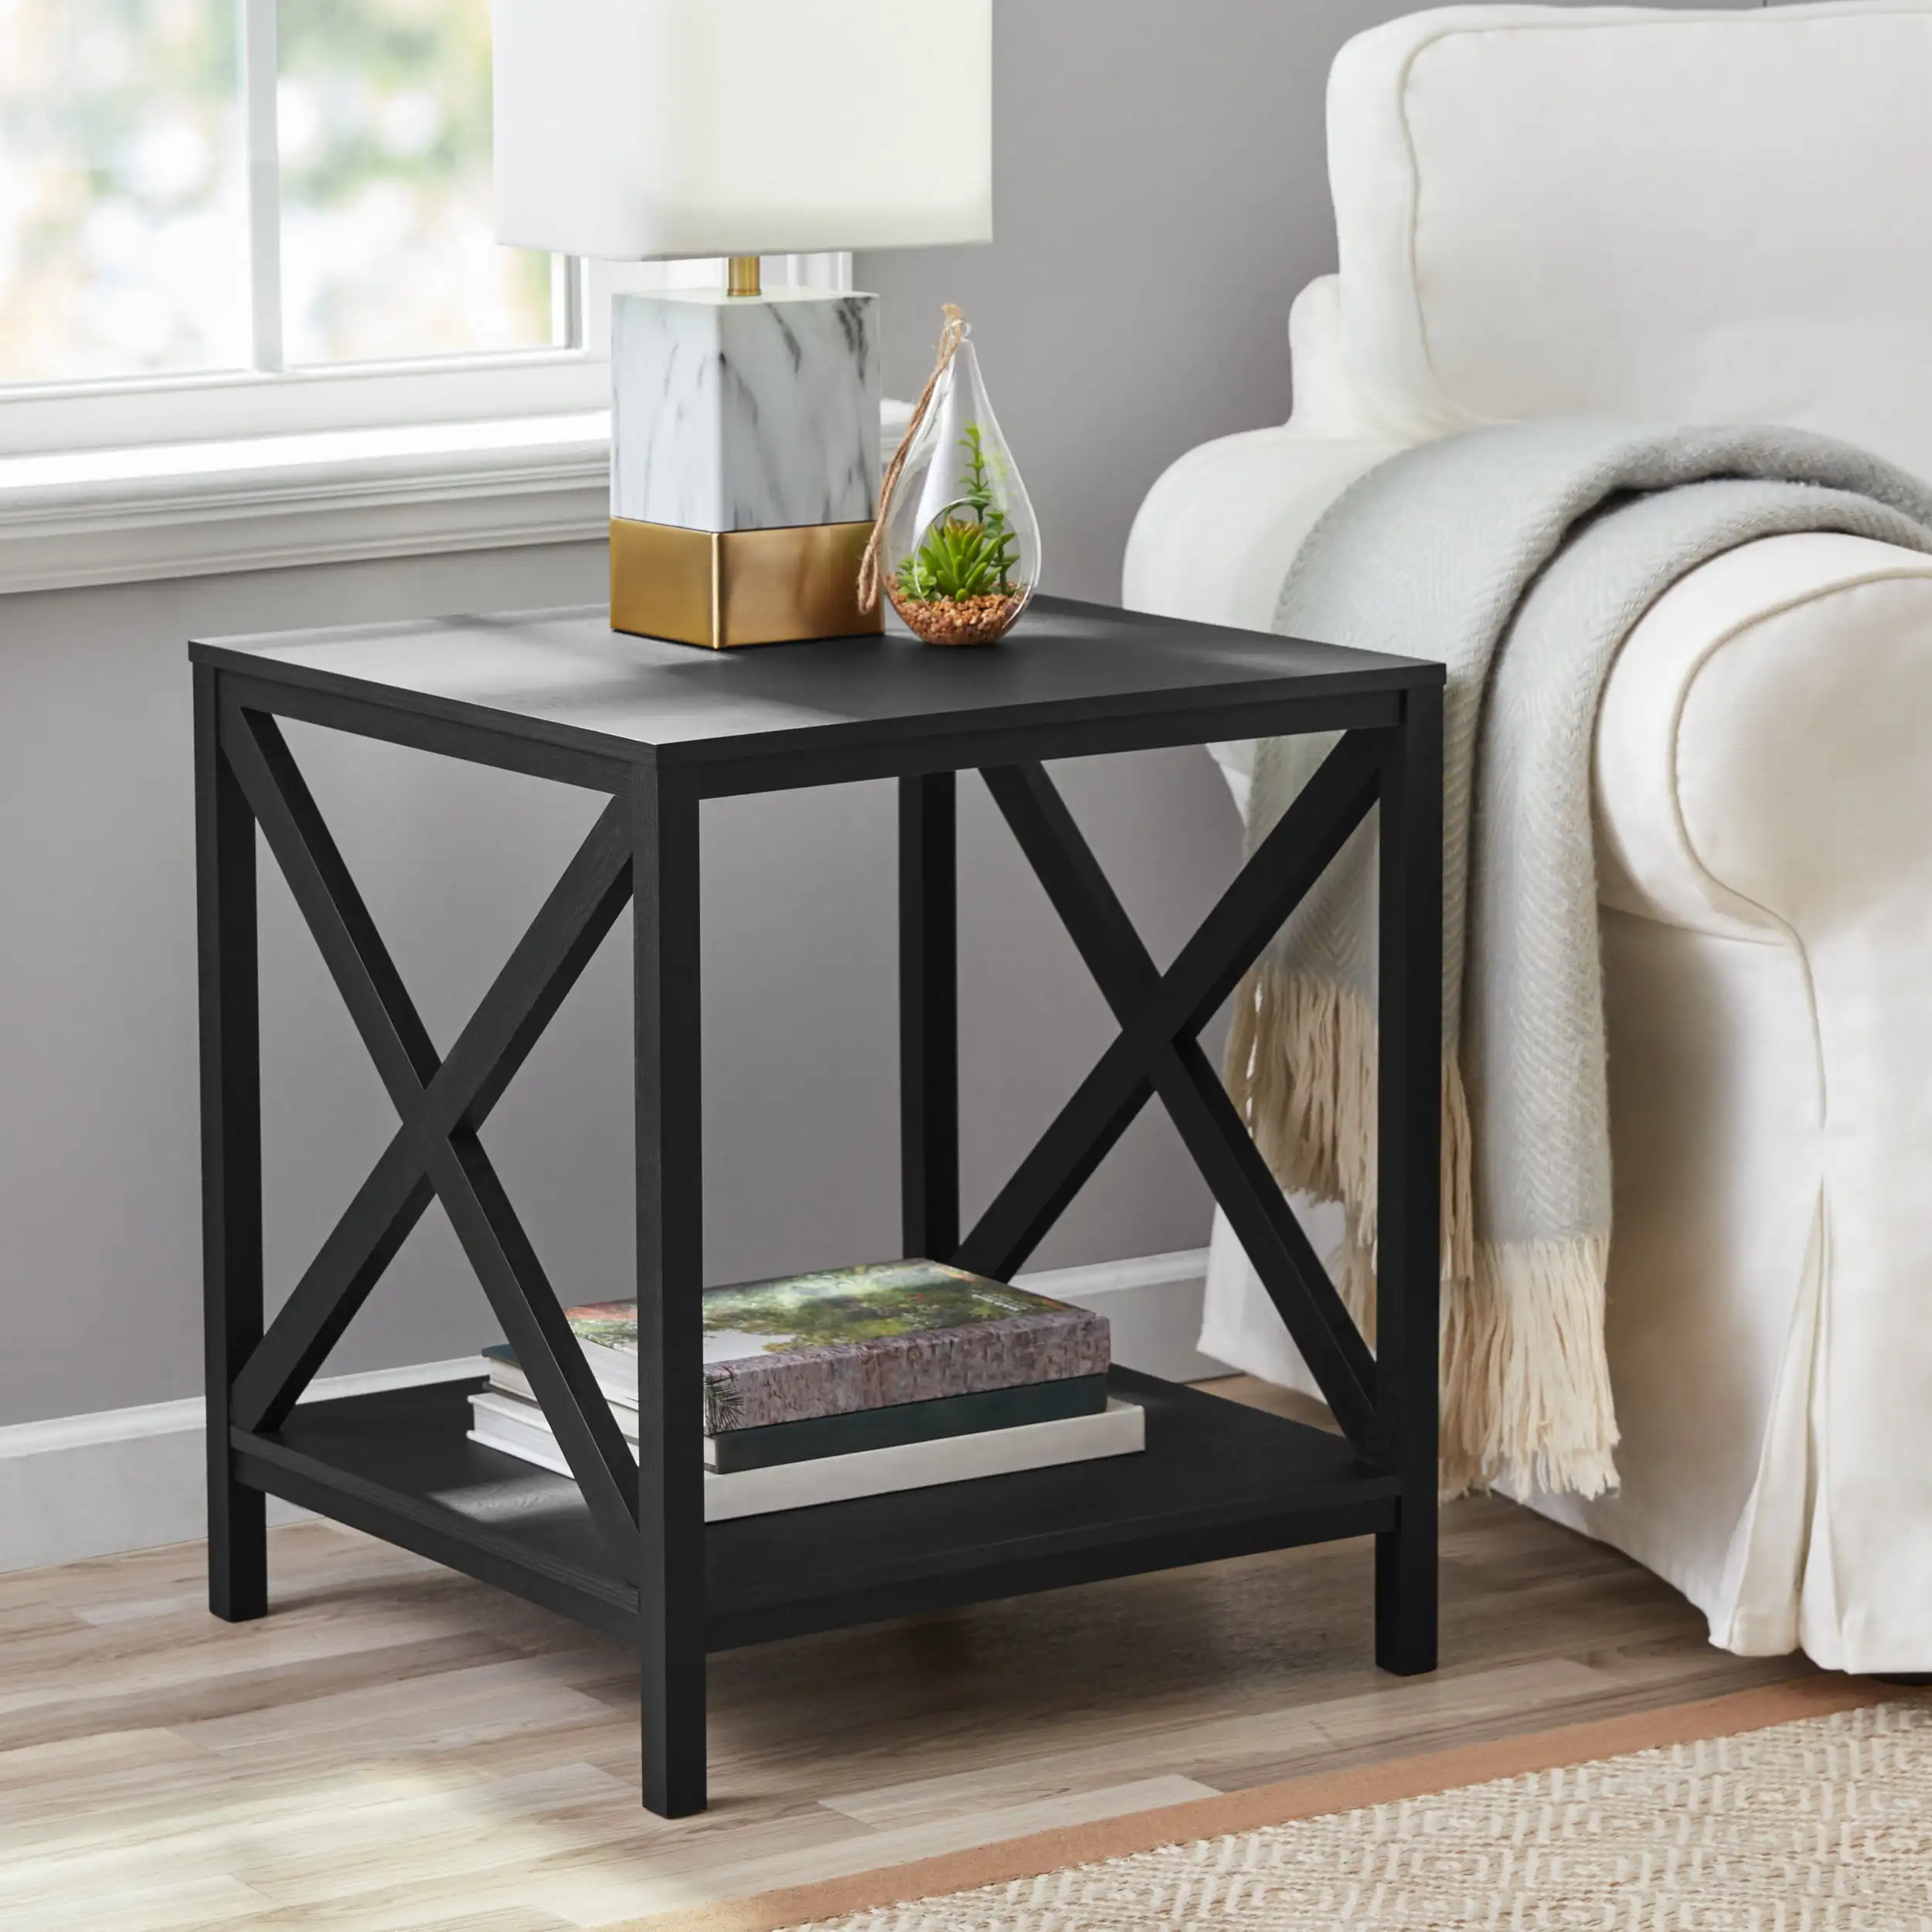 Wooden black side table X design square end table for living room and outdoor coffee